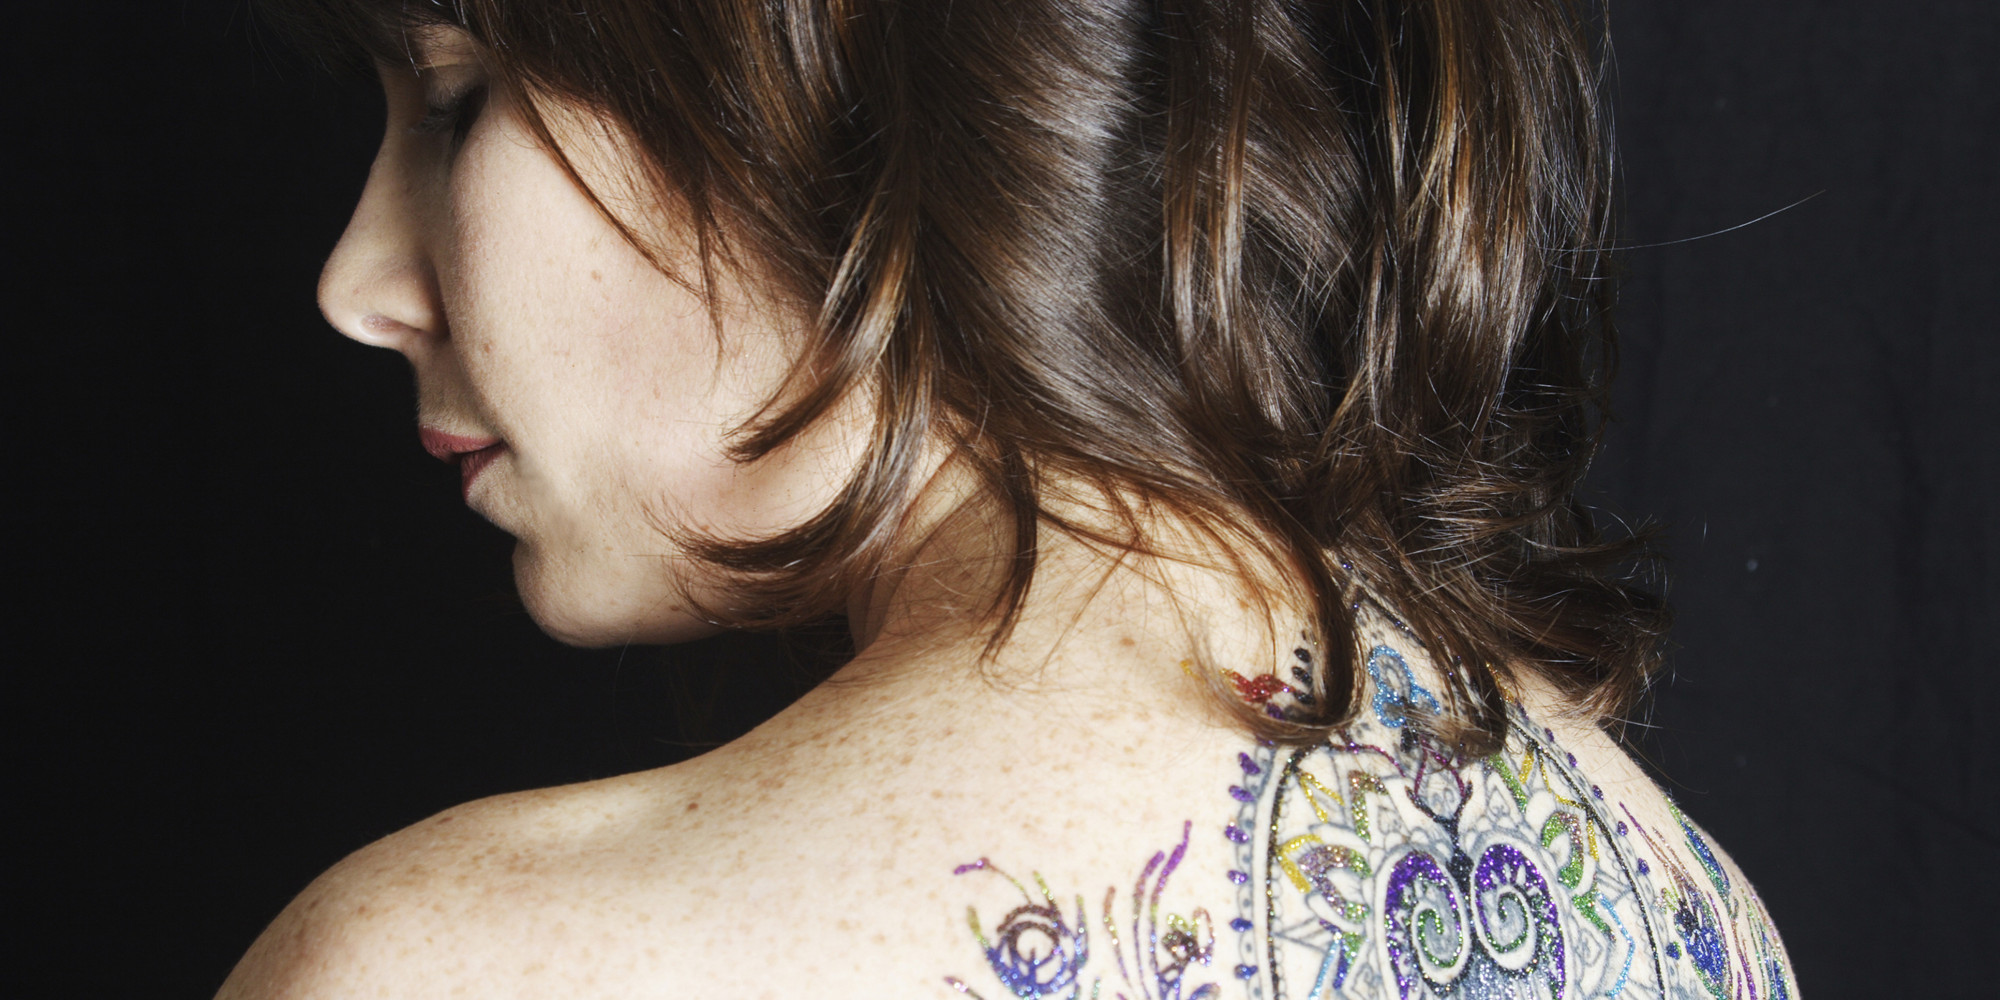 Things You Need To Know Before You Get A Tattoo You'll Regret | HuffPost